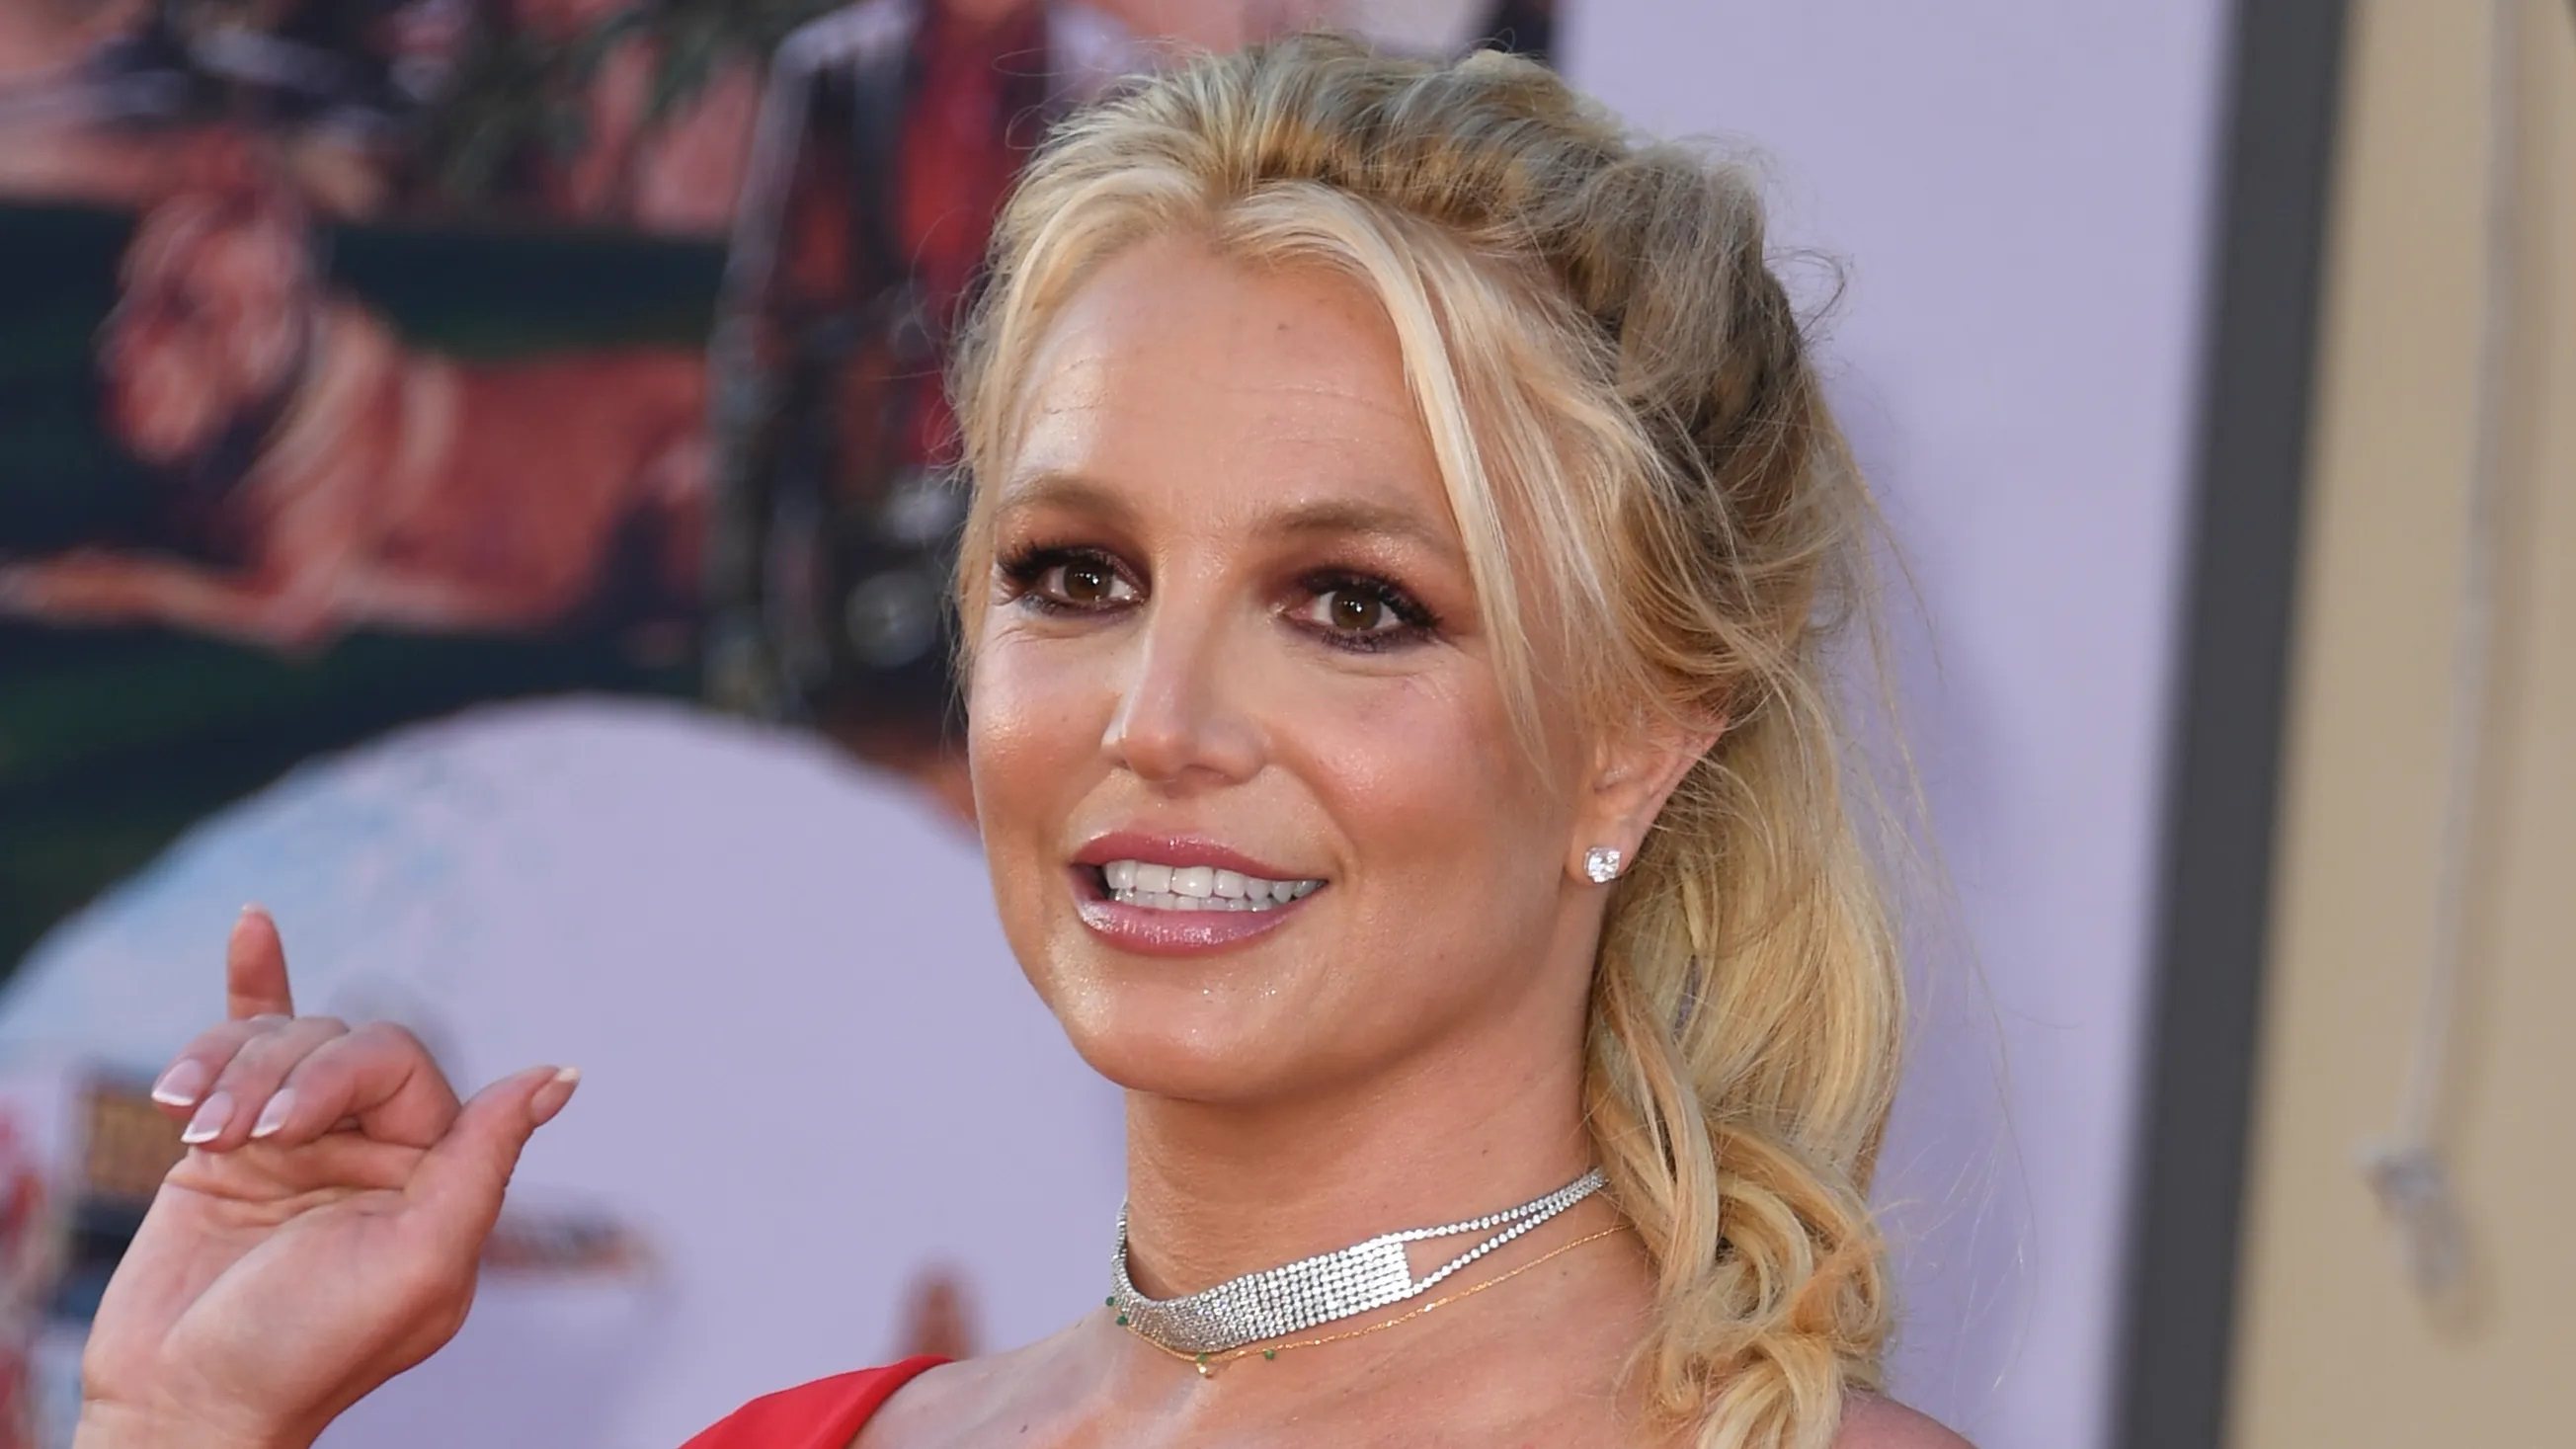 Britney Spears Reveals Why She Posts Nudes: A Tale Of Freedom And Self-Empowerment